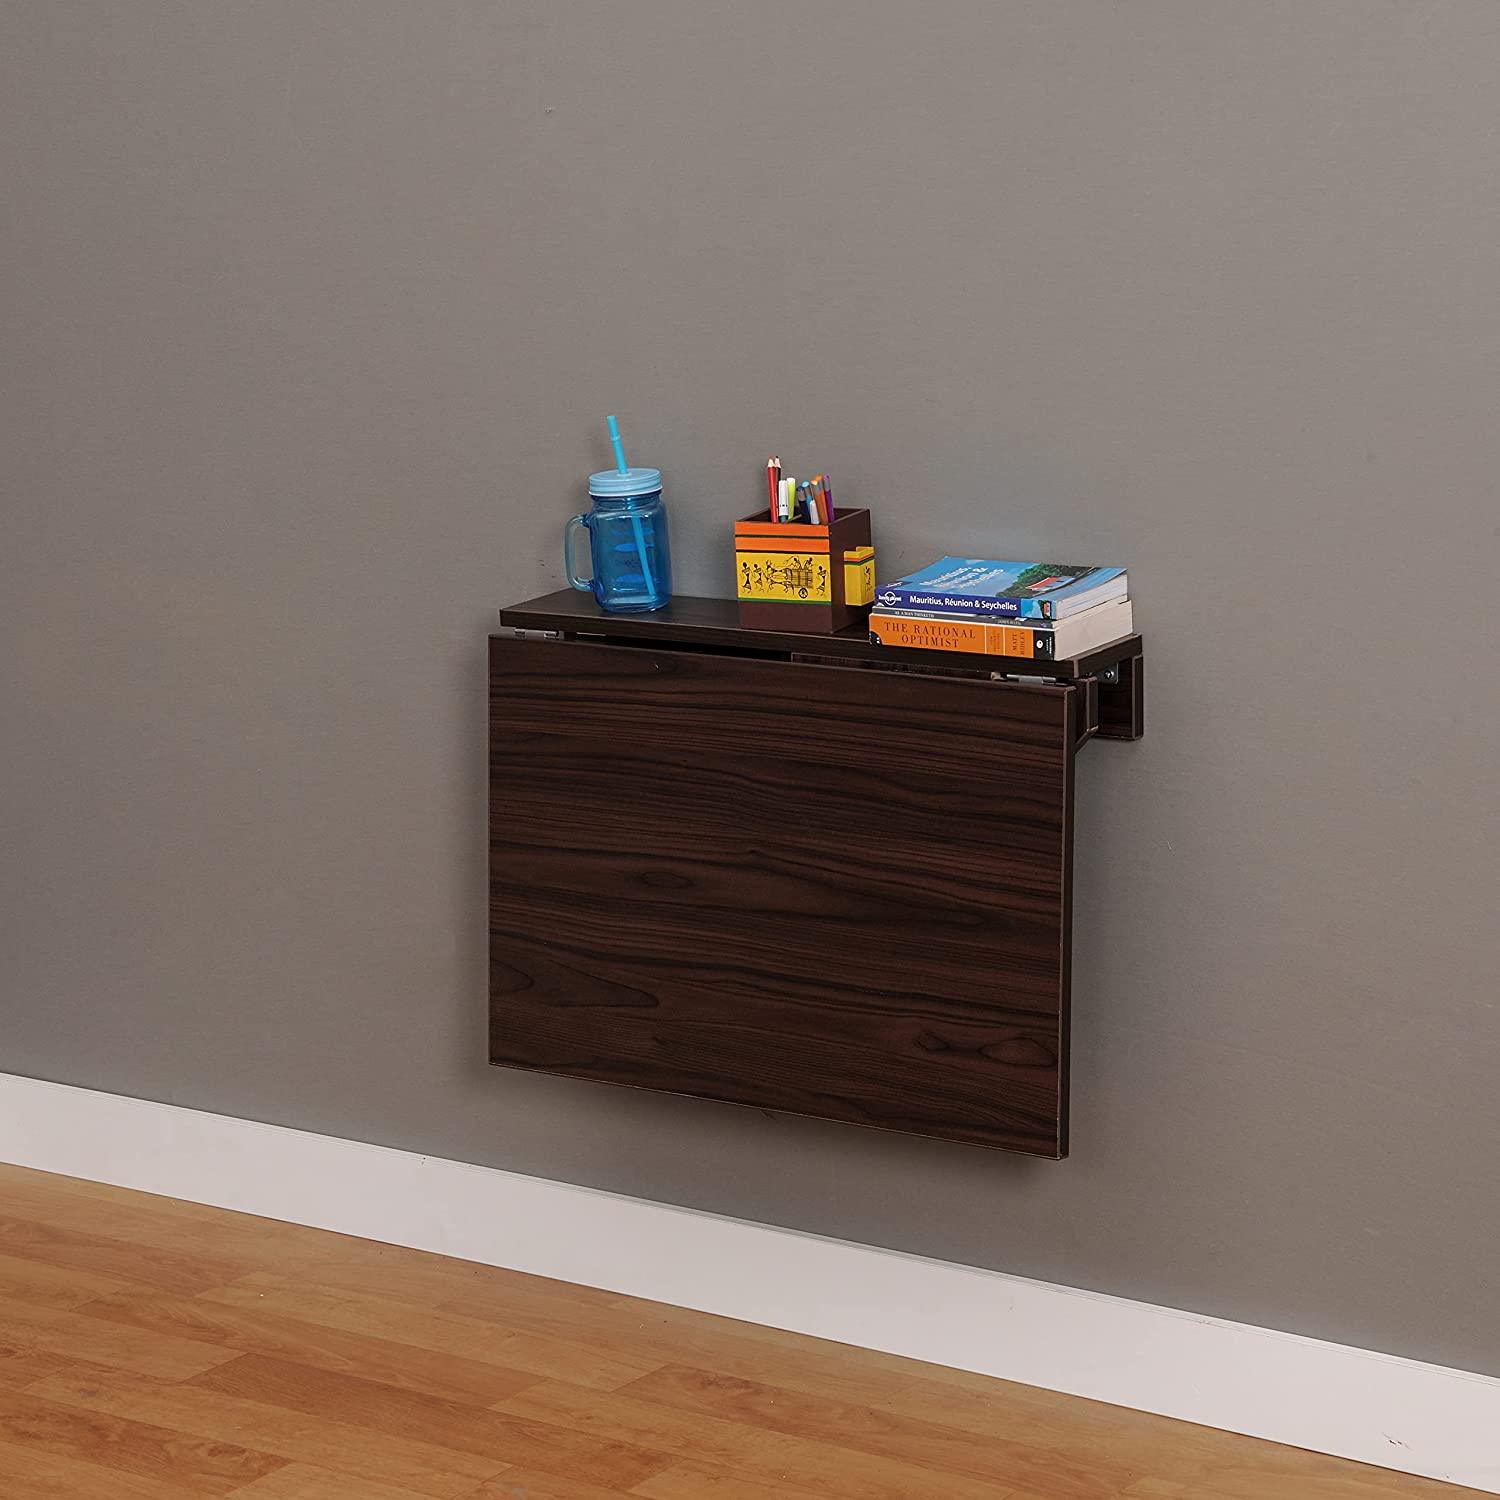 Wall Mounted iDesk with Ledge With Study Lamp